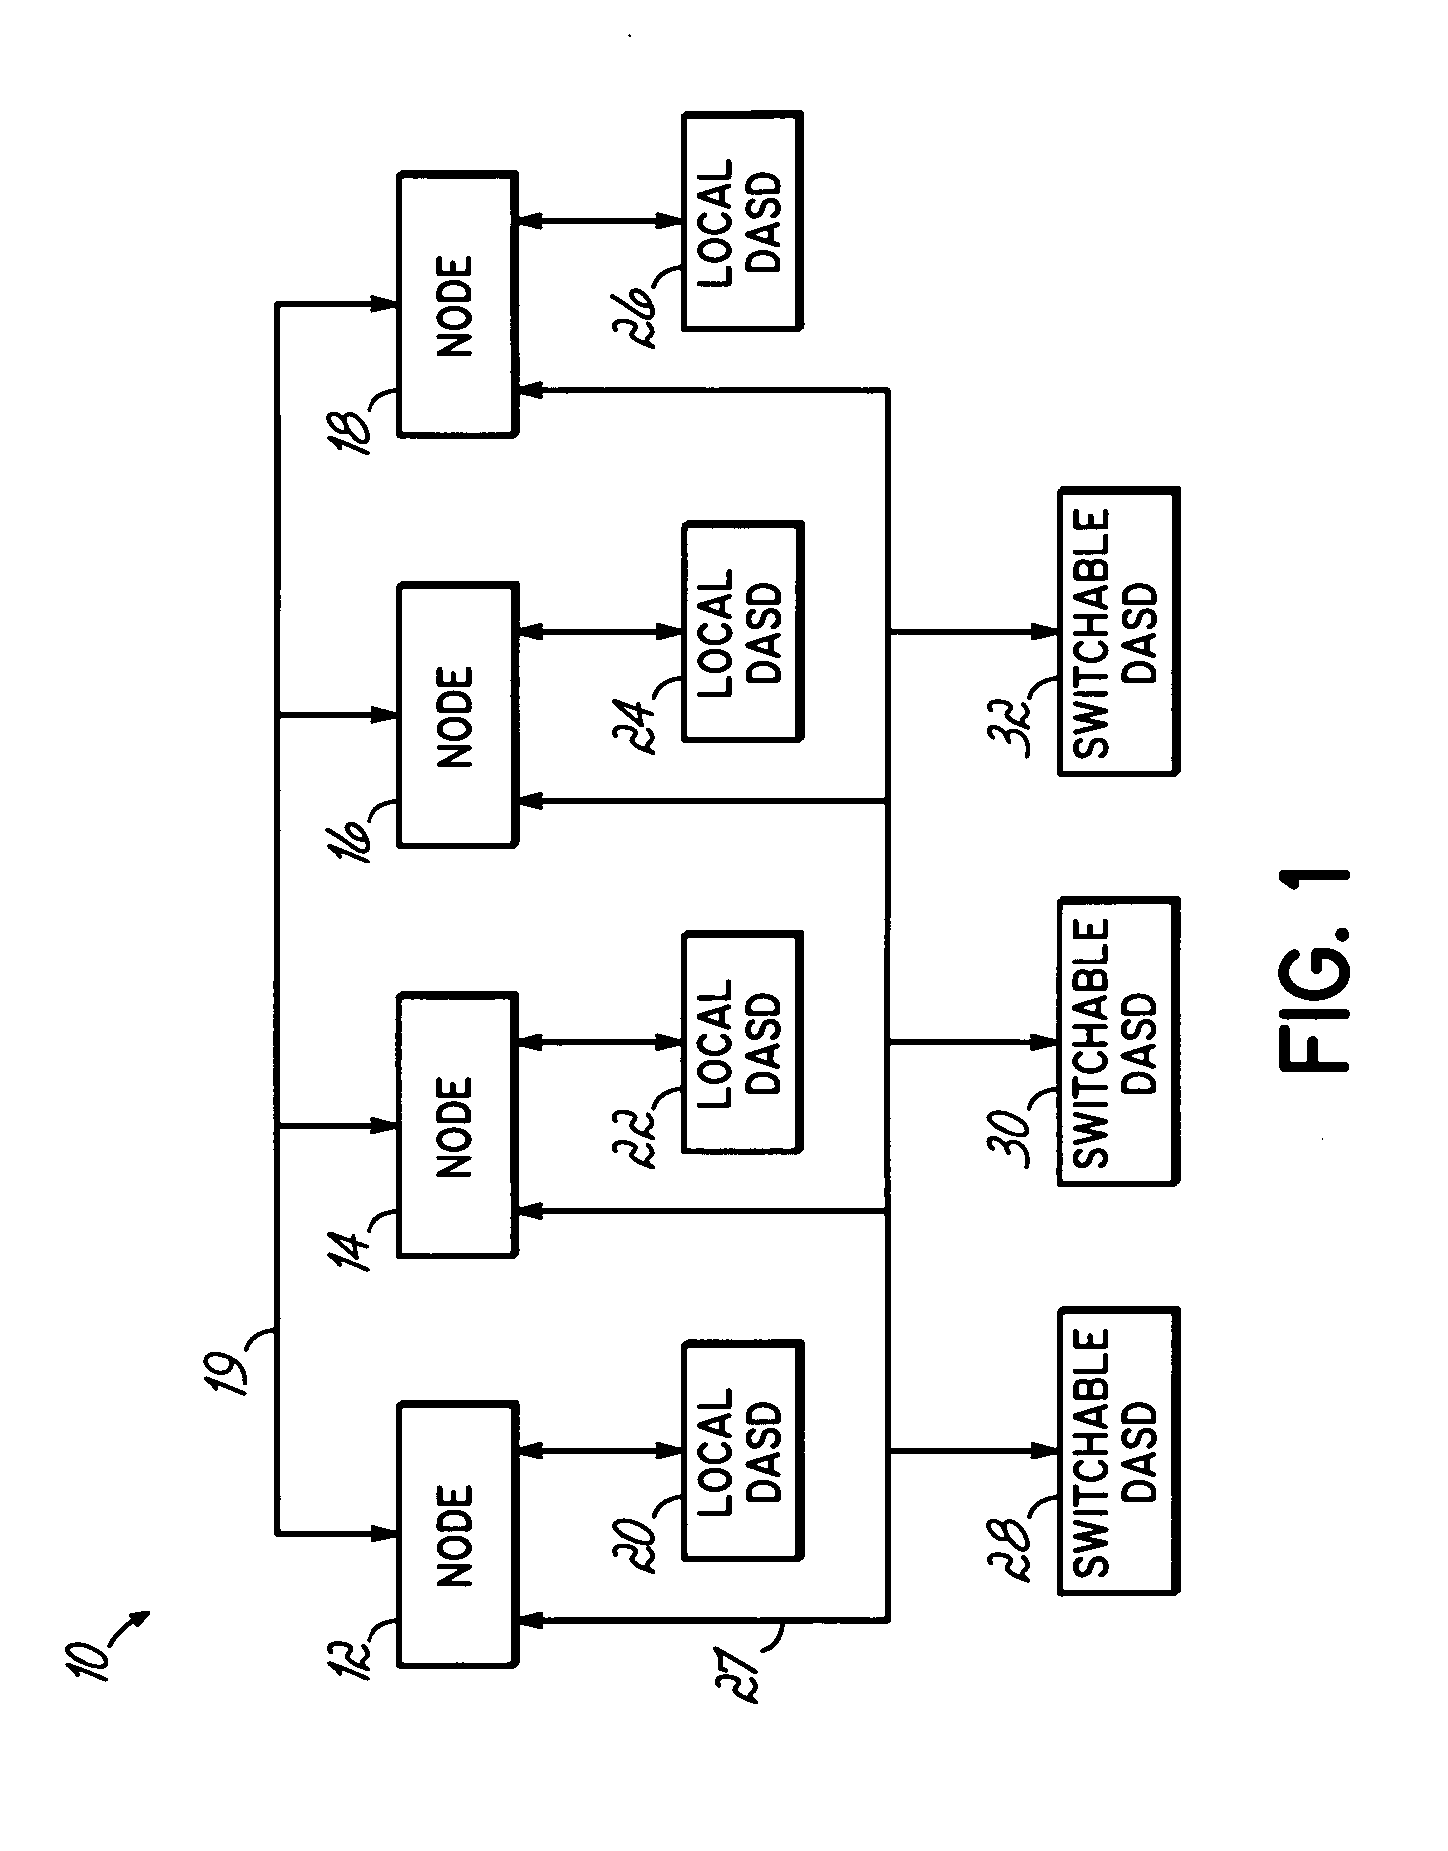 Commingled write cache in dual input/output adapter